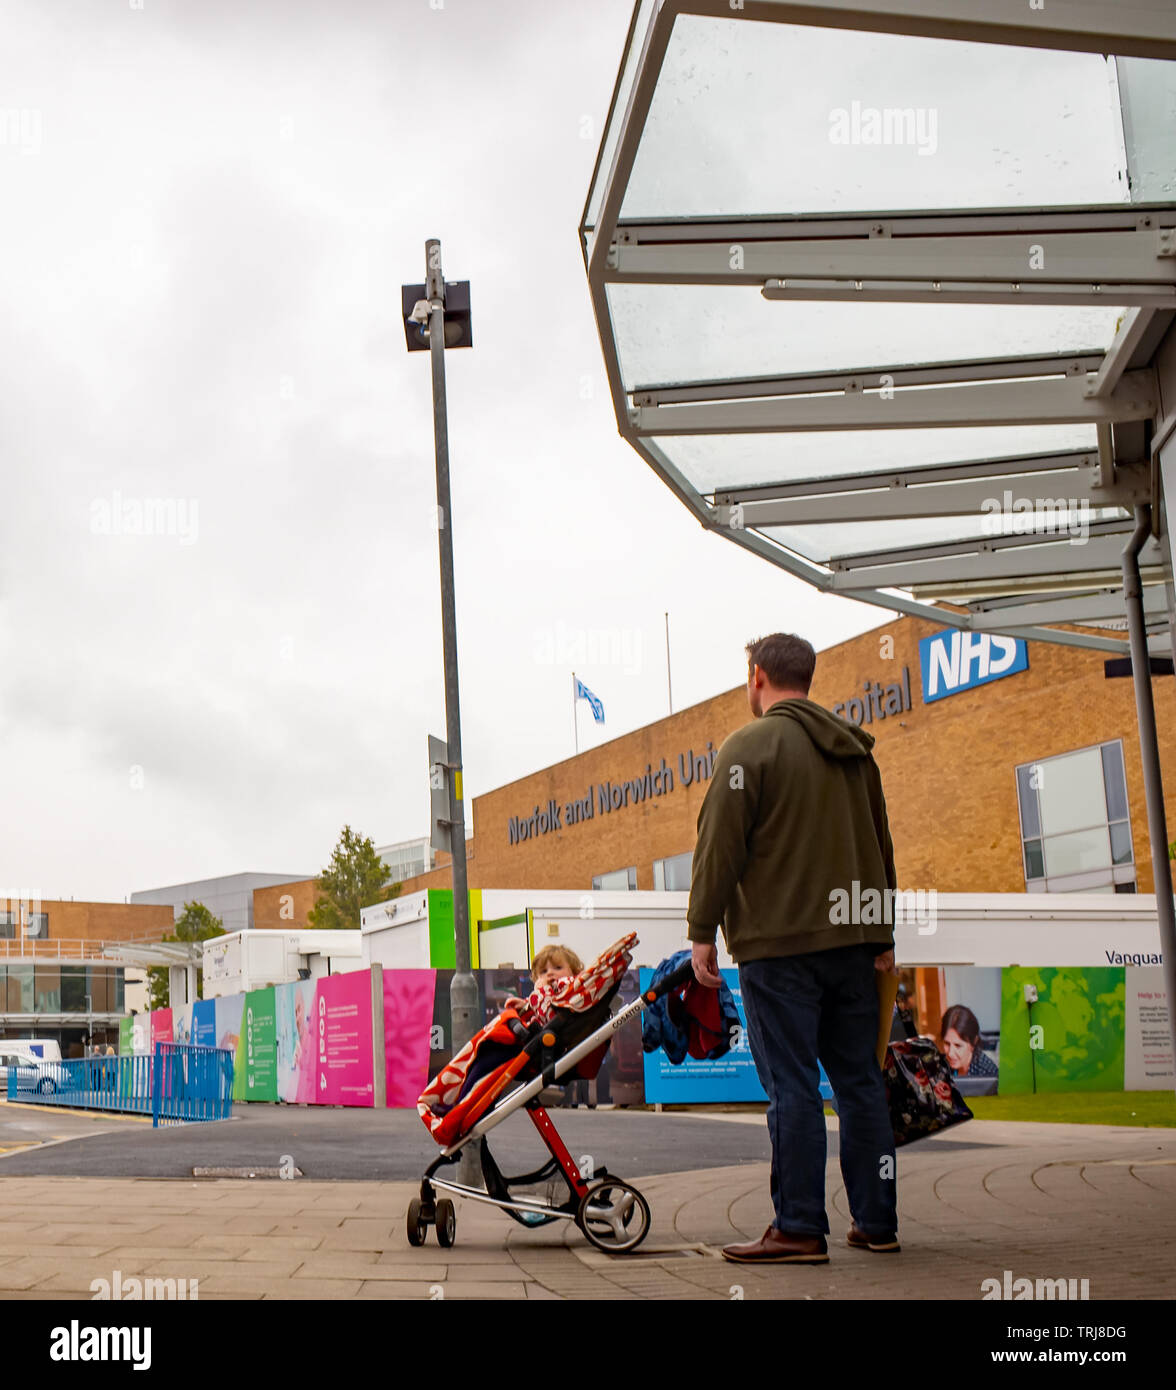 Norwich, Norfolk, UK. 18 May 2019. Candid photos - Man waiting outside at the NHS Norwich University Hospital with his baby daughter in a pushchair waiting for a taxi Stock Photo